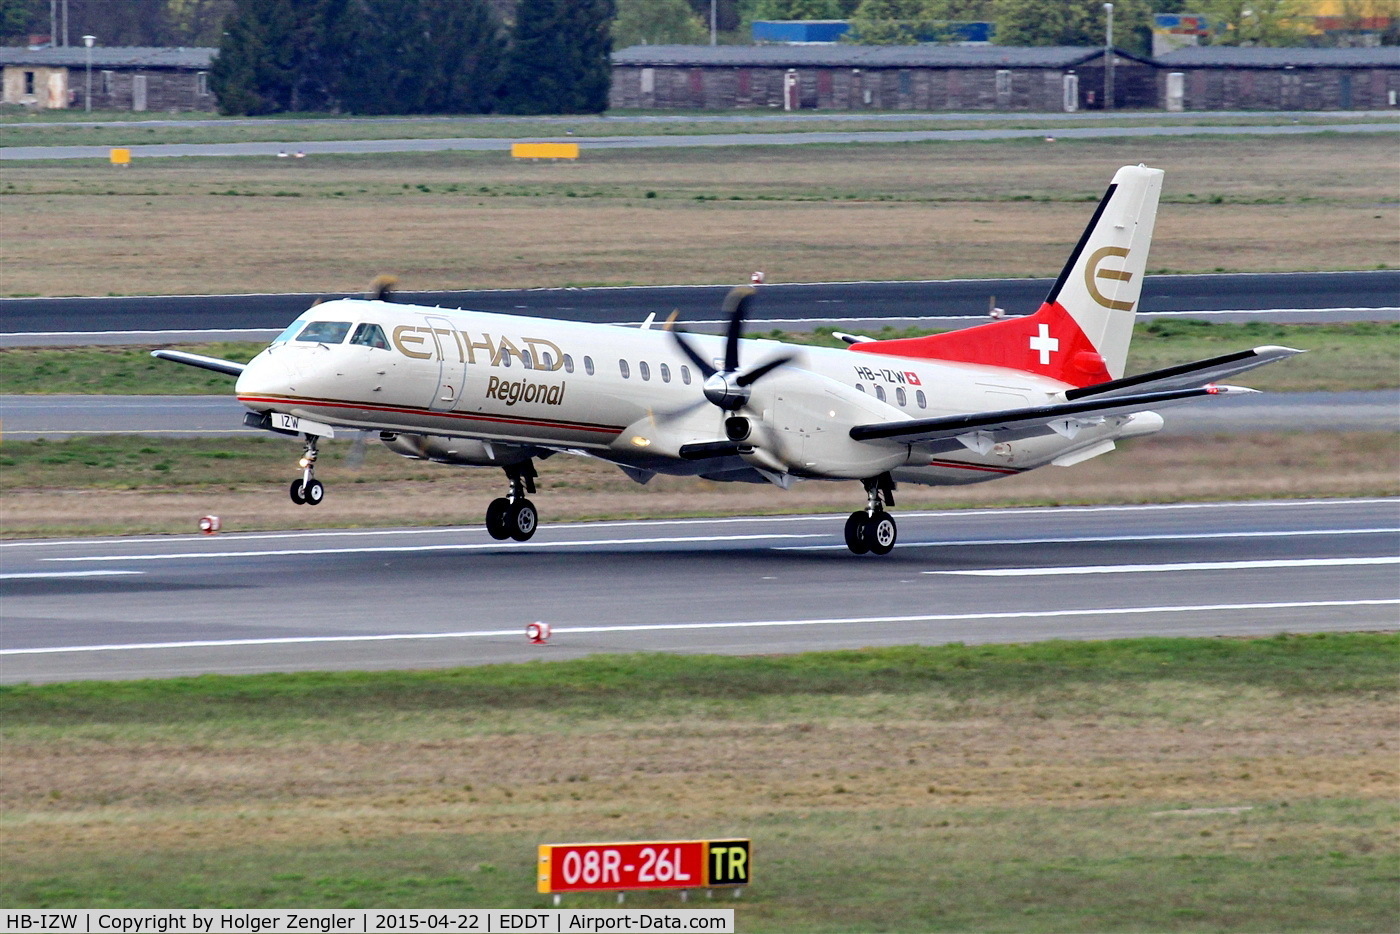 HB-IZW, 1996 Saab 2000 C/N 2000-039, Departing for southbound flight to GVA...